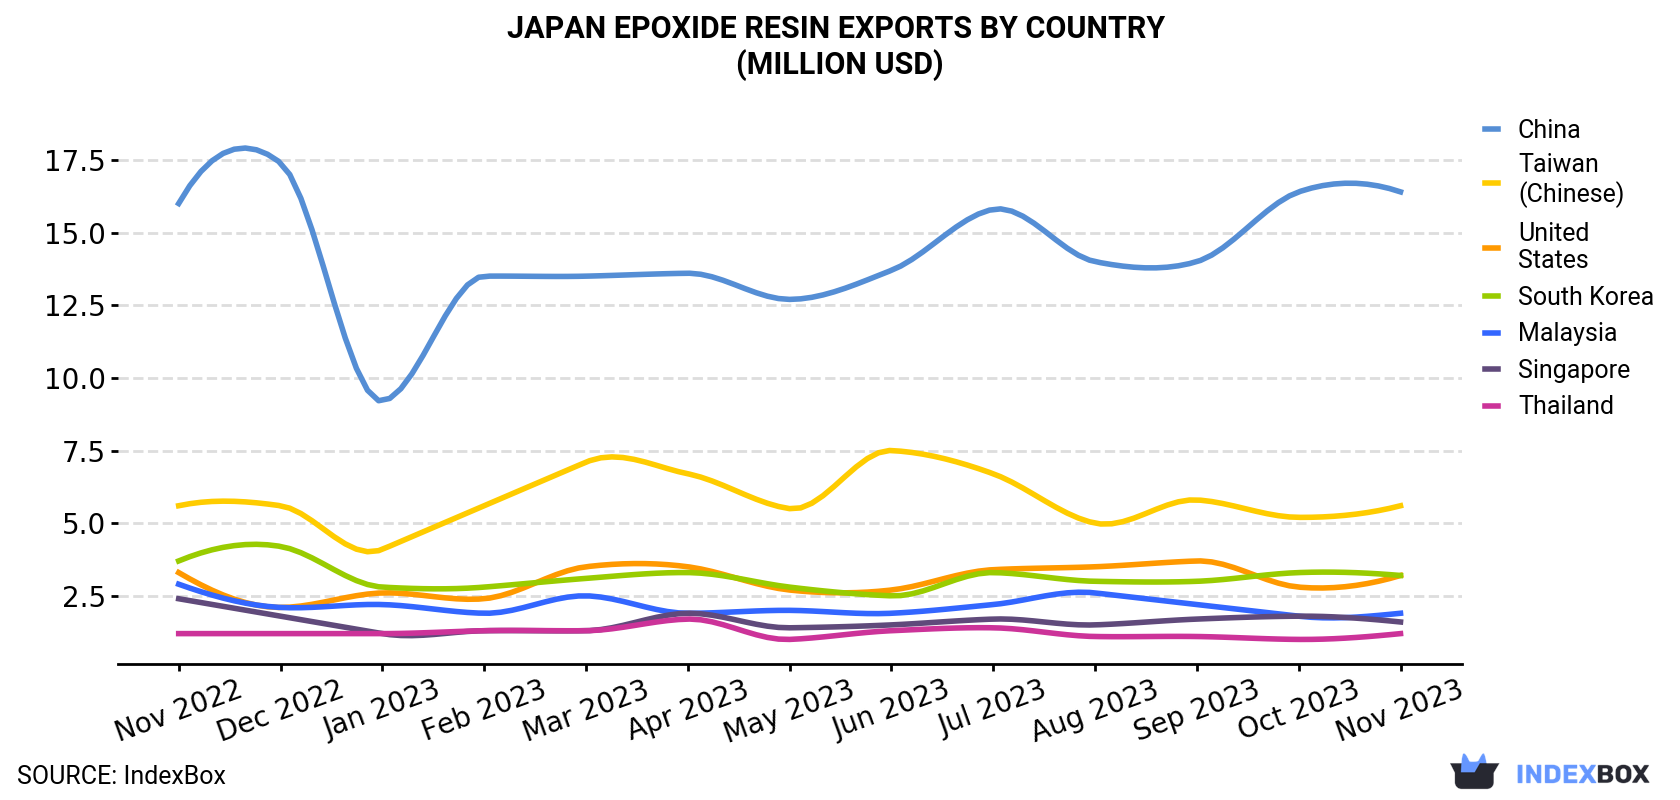 Japan Epoxide Resin Exports By Country (Million USD)